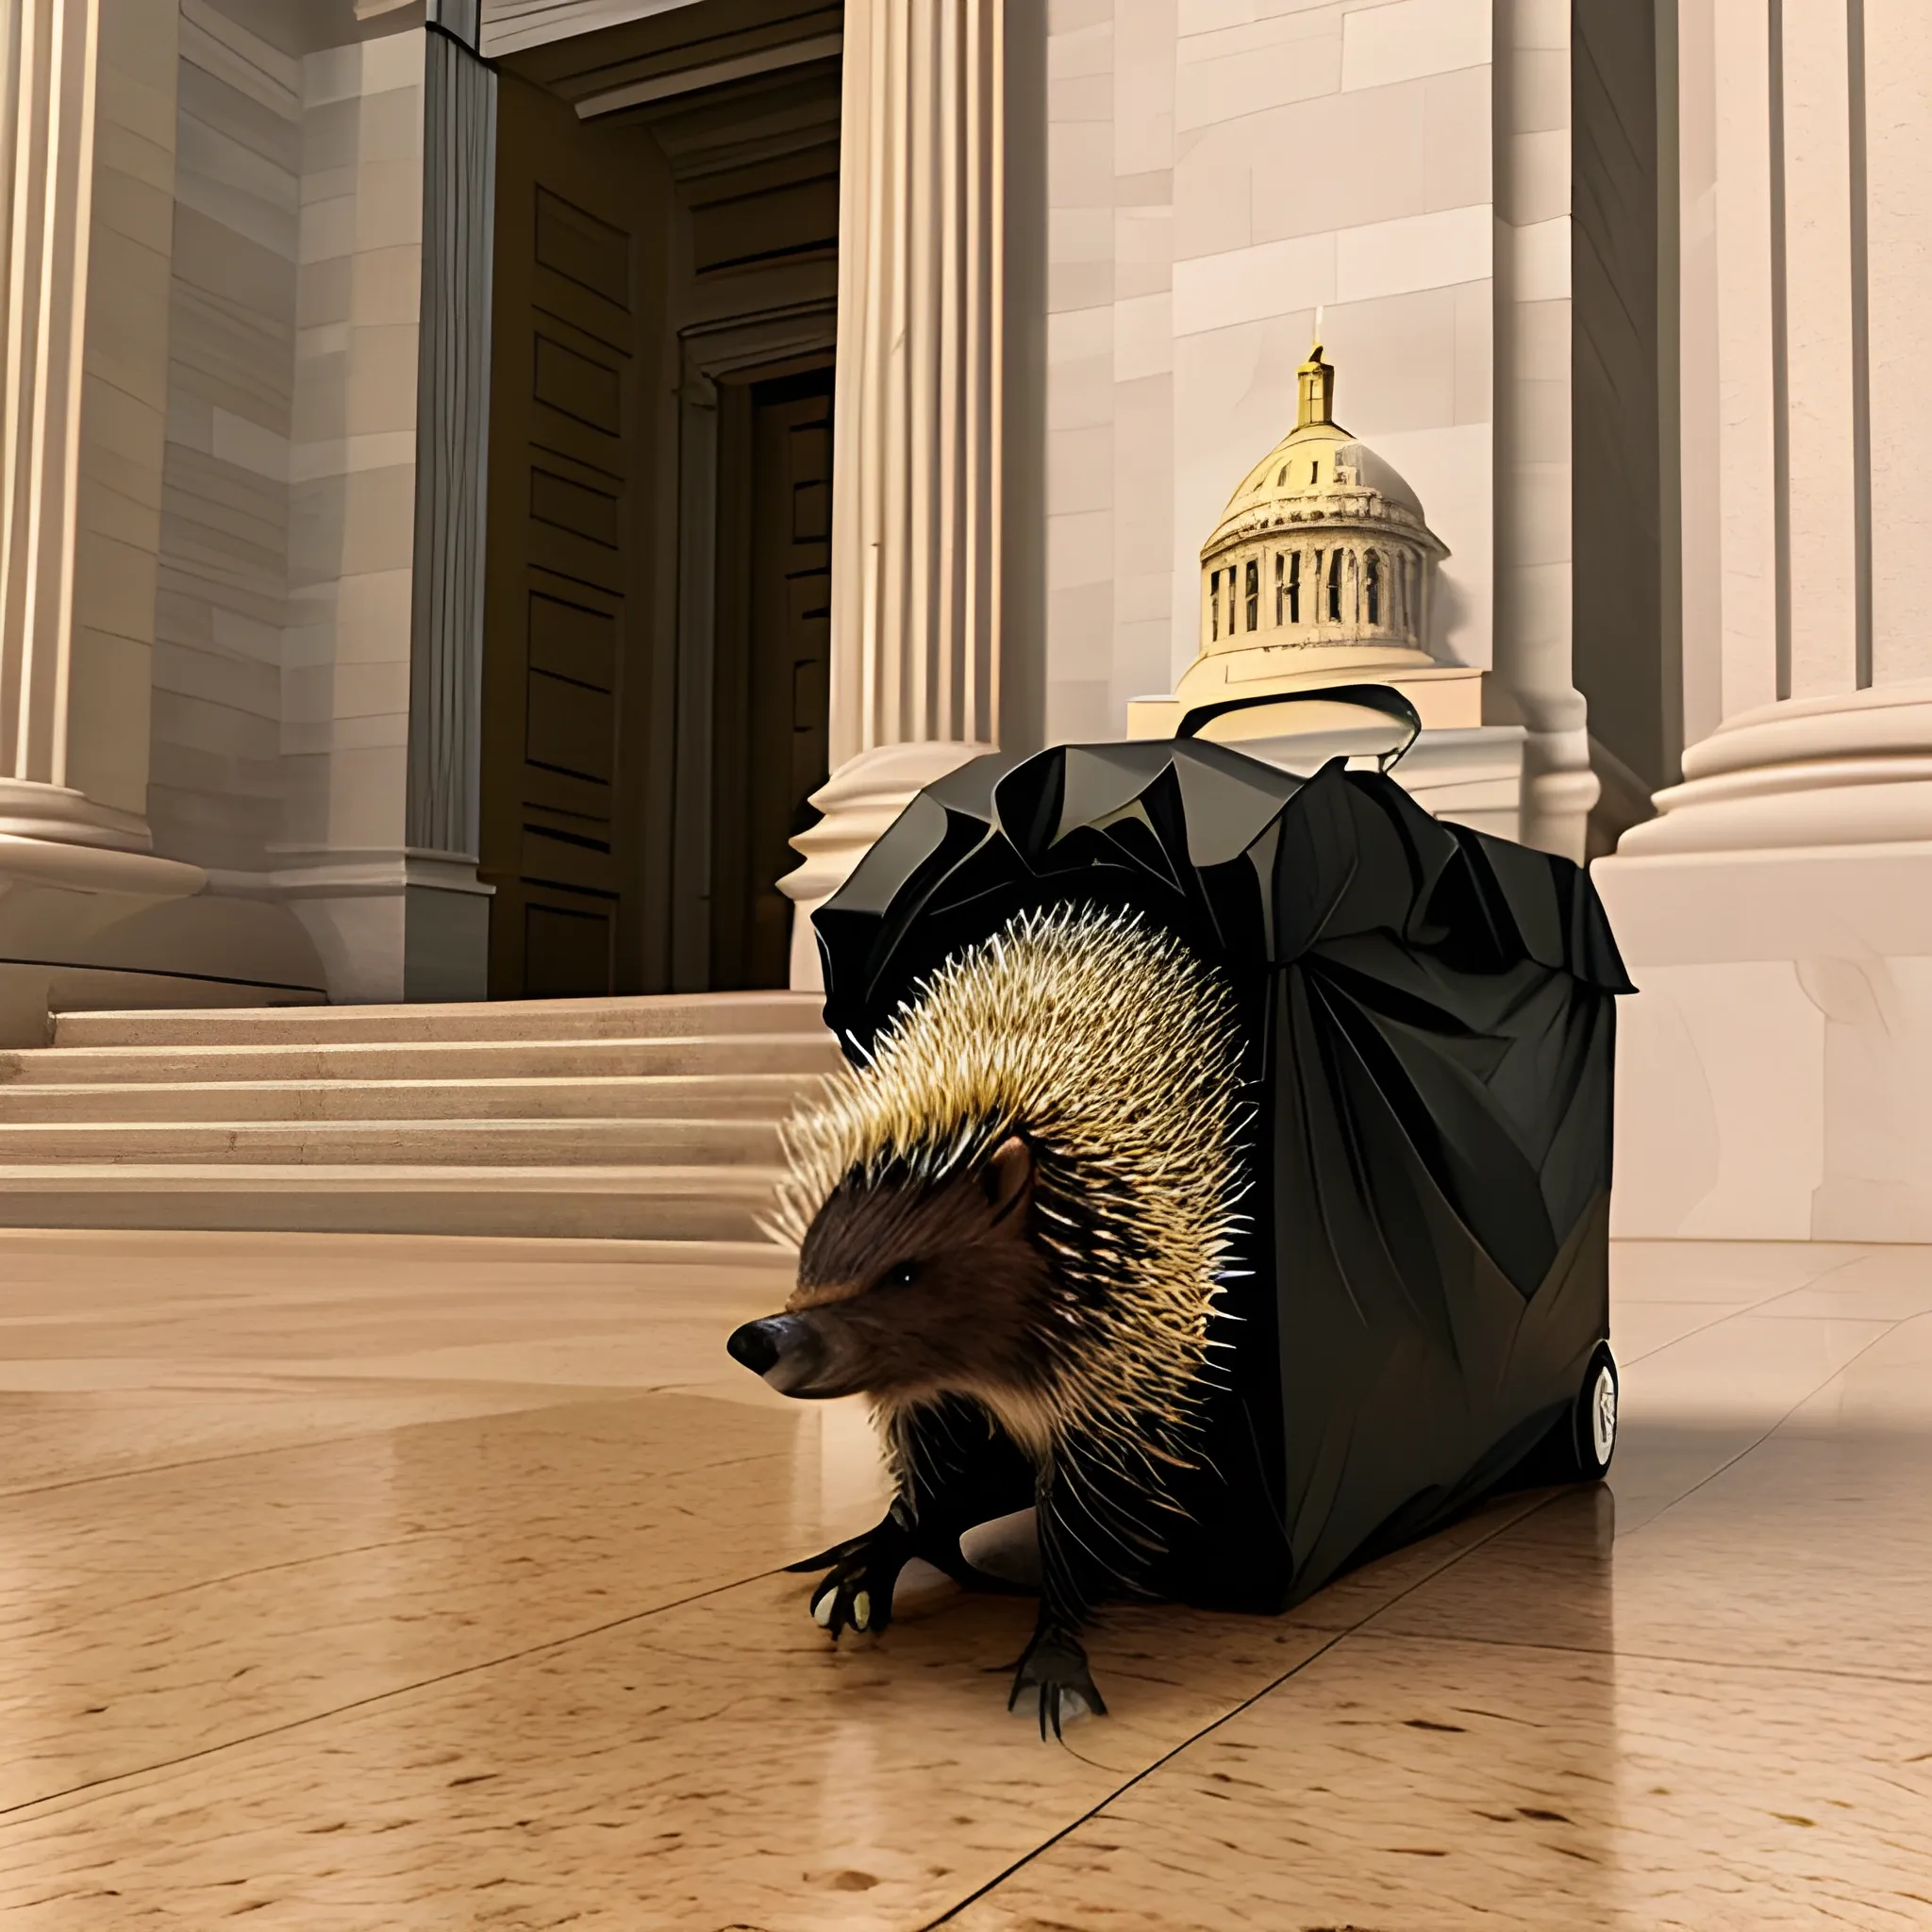 Photo of a porcupine taking out the trash, with a capitol building rotunda sticking out of the trash bag, 3D